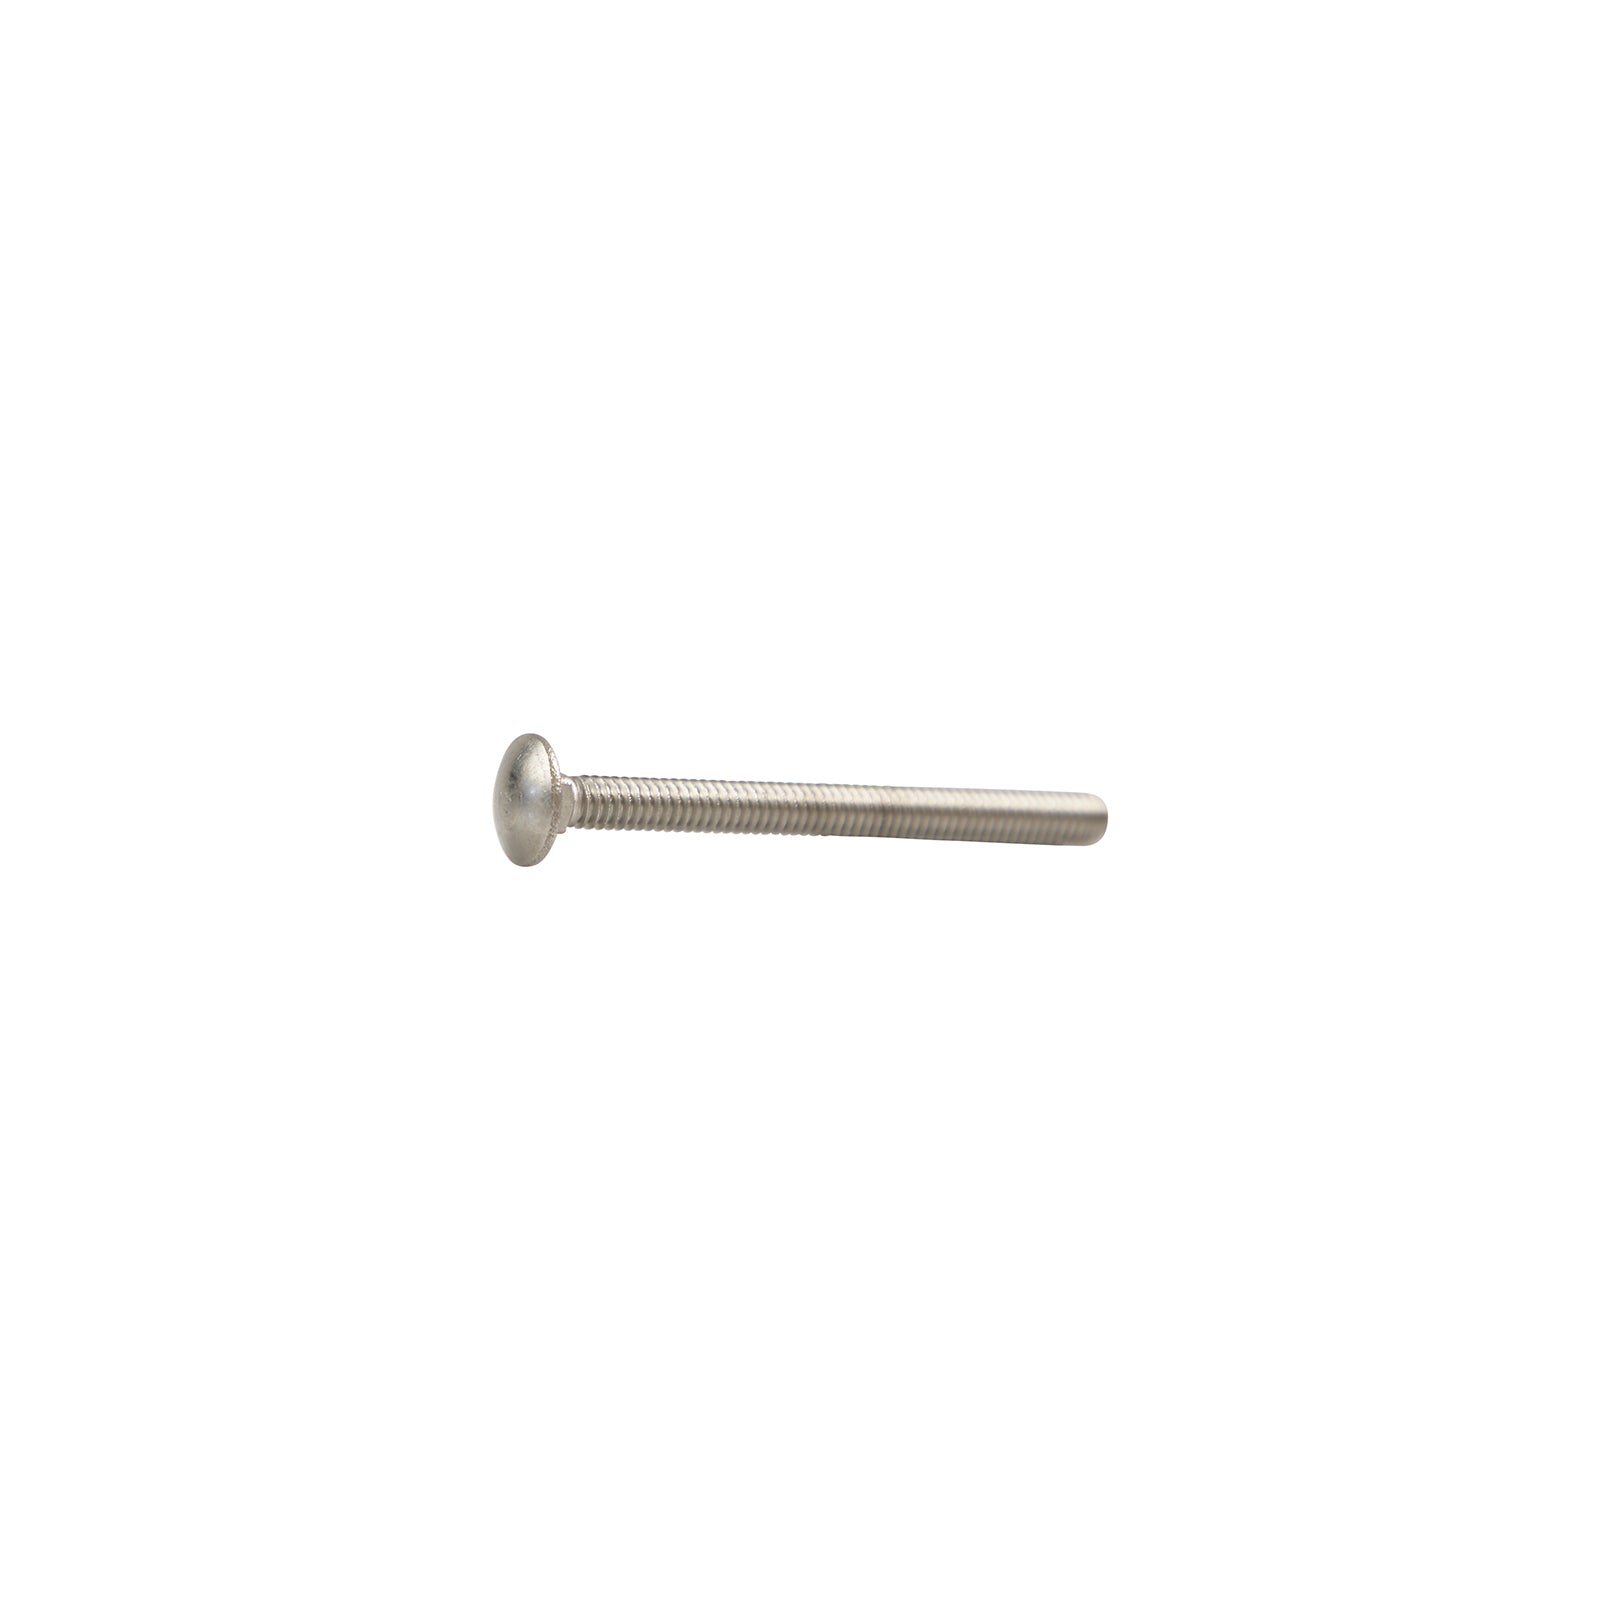 1/4"-20 x 3" Conquest Carriage Bolt - 304 Stainless Steel